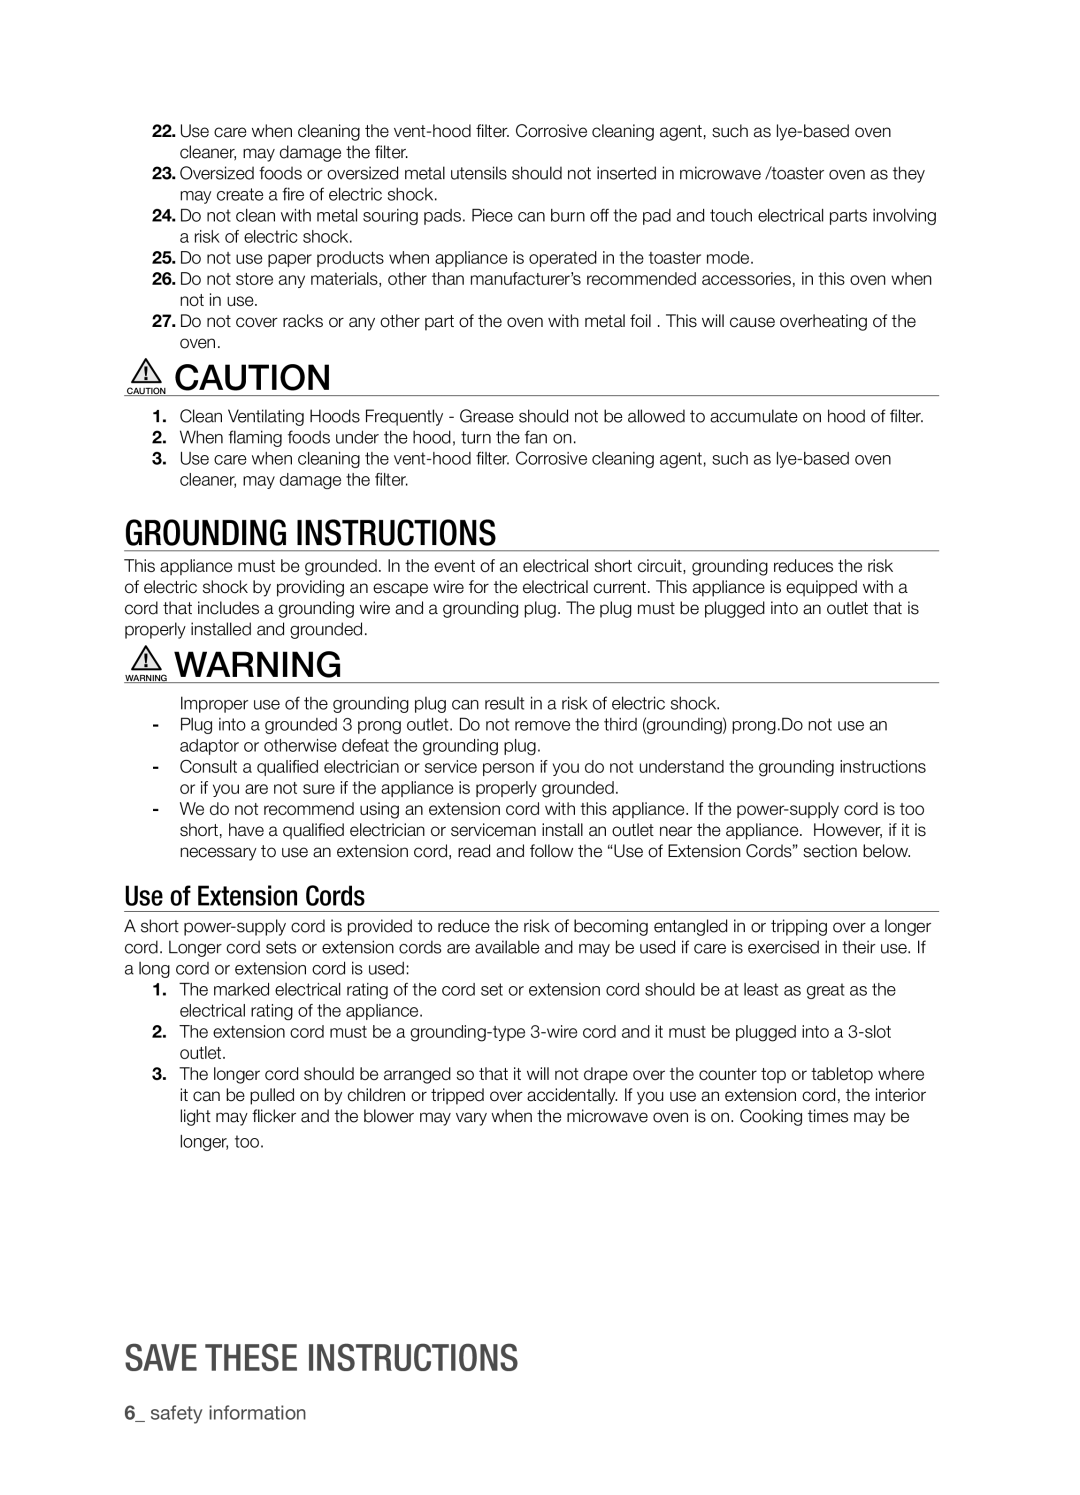 Samsung SMK9175ST user manual Grounding Instructions, Save these instructions, Use of Extension Cords, safety information 